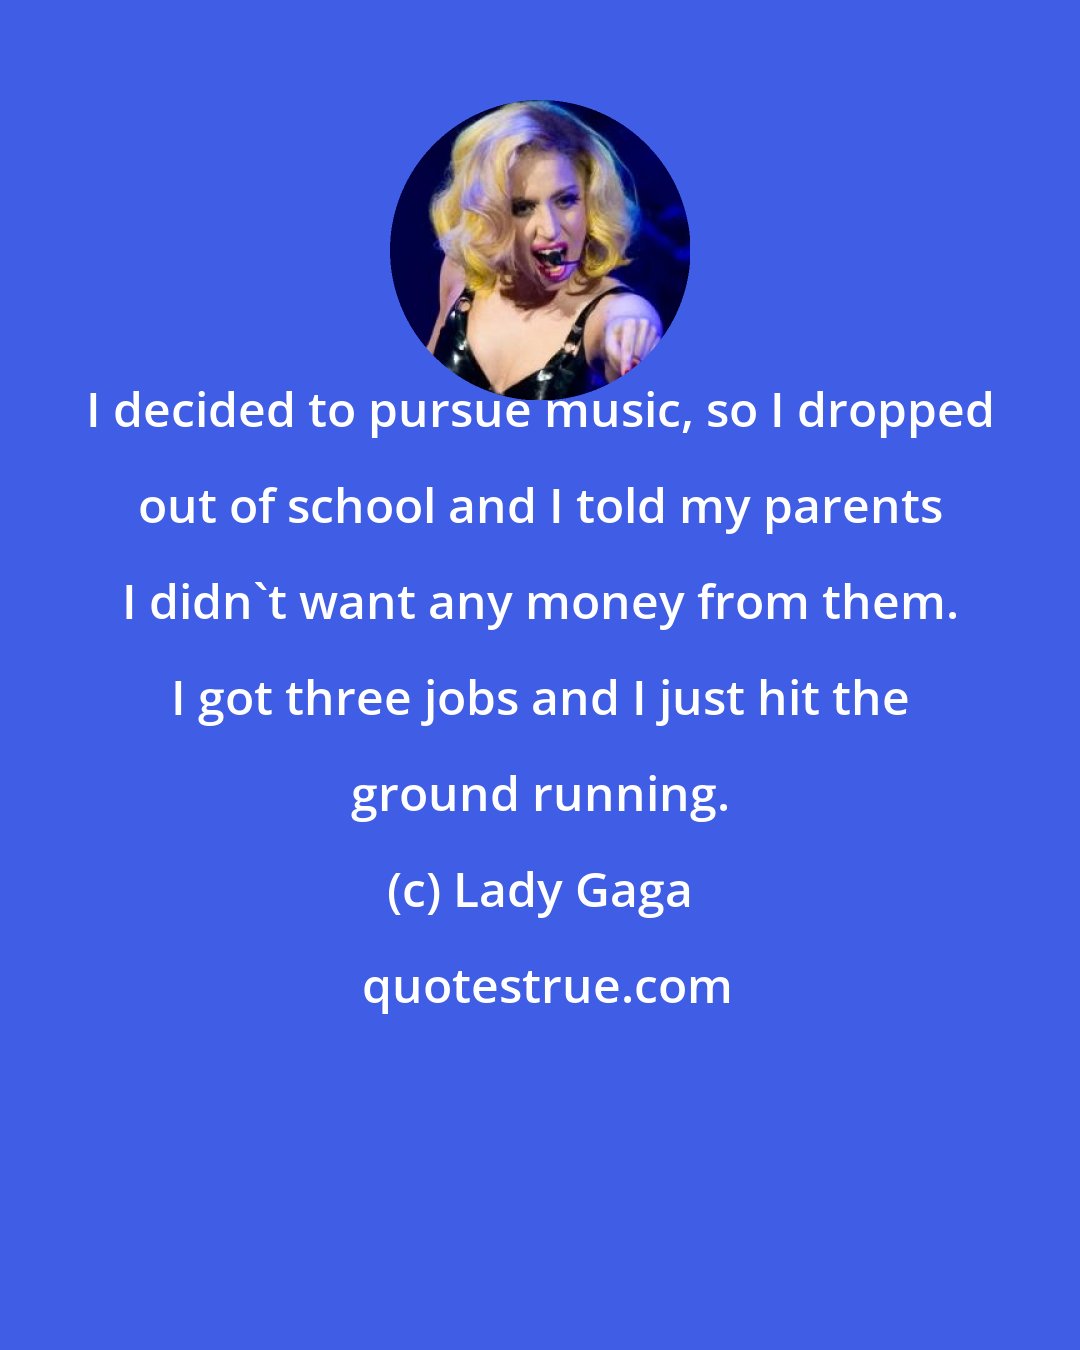 Lady Gaga: I decided to pursue music, so I dropped out of school and I told my parents I didn't want any money from them. I got three jobs and I just hit the ground running.